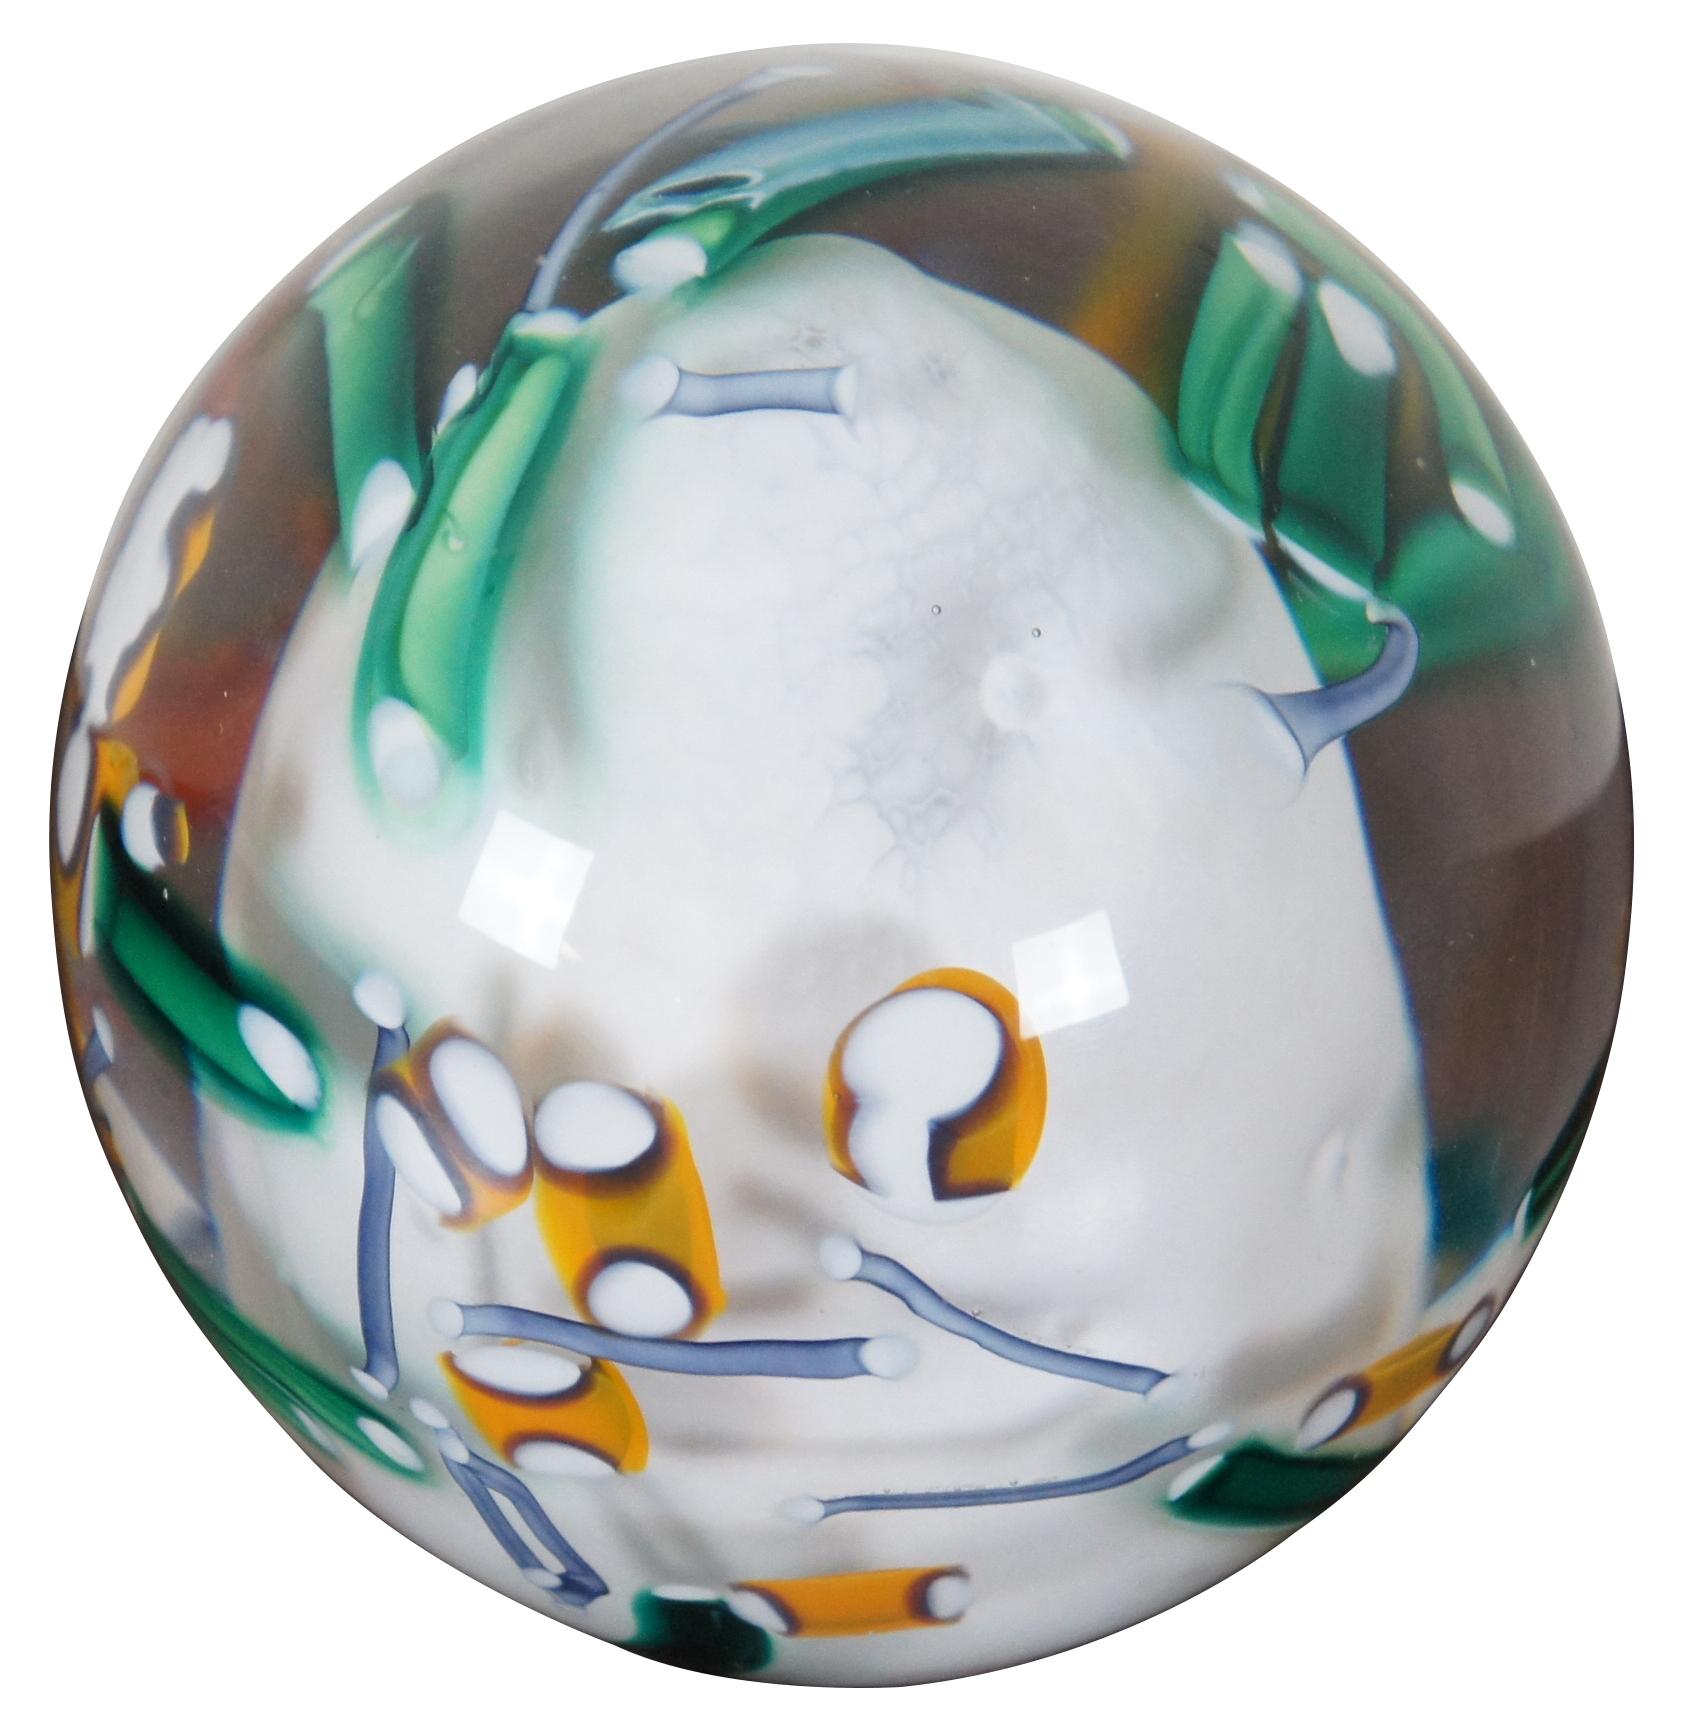 Vintage signed art glass paperweight orb featuring abstract shapes in white, green, blue and orange.
 